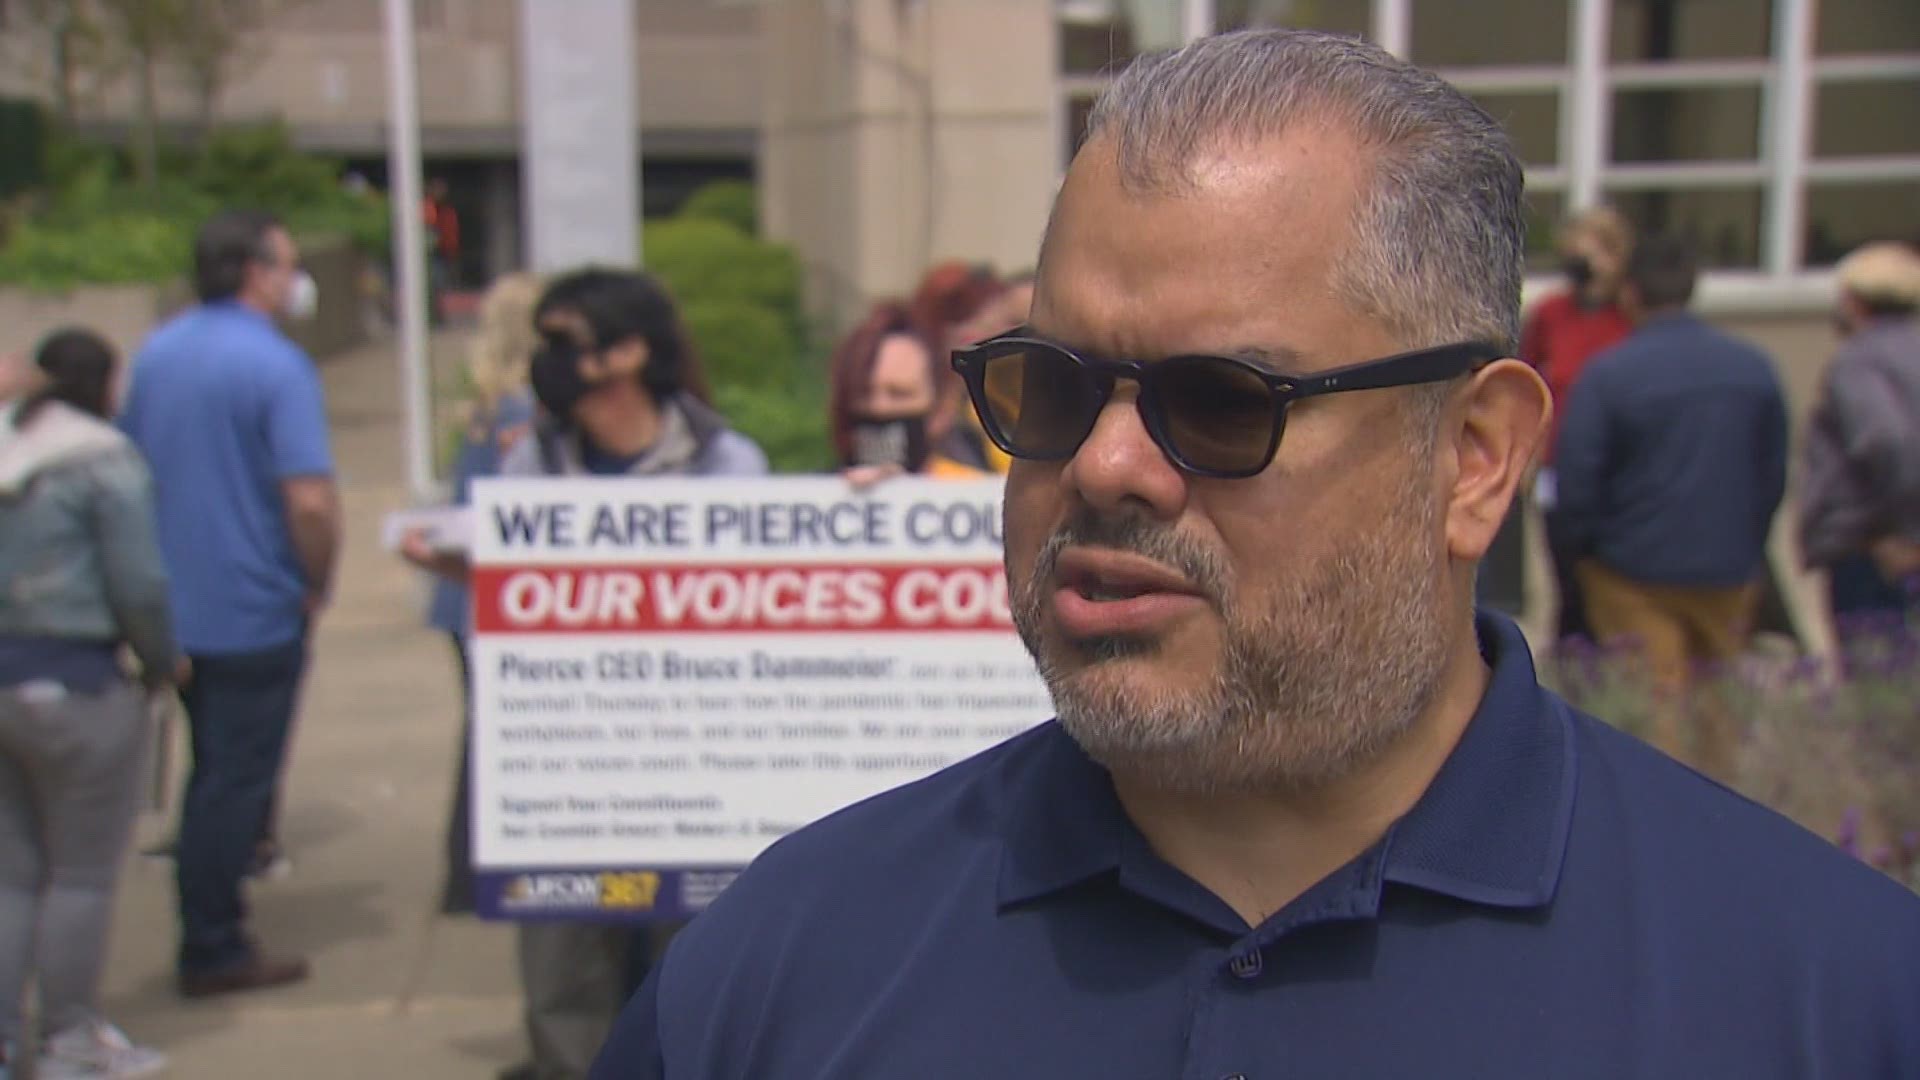 Grocery workers in Pierce County are demanding they be heard after an ordinance granting them hazard pay was rejected by the county executive.